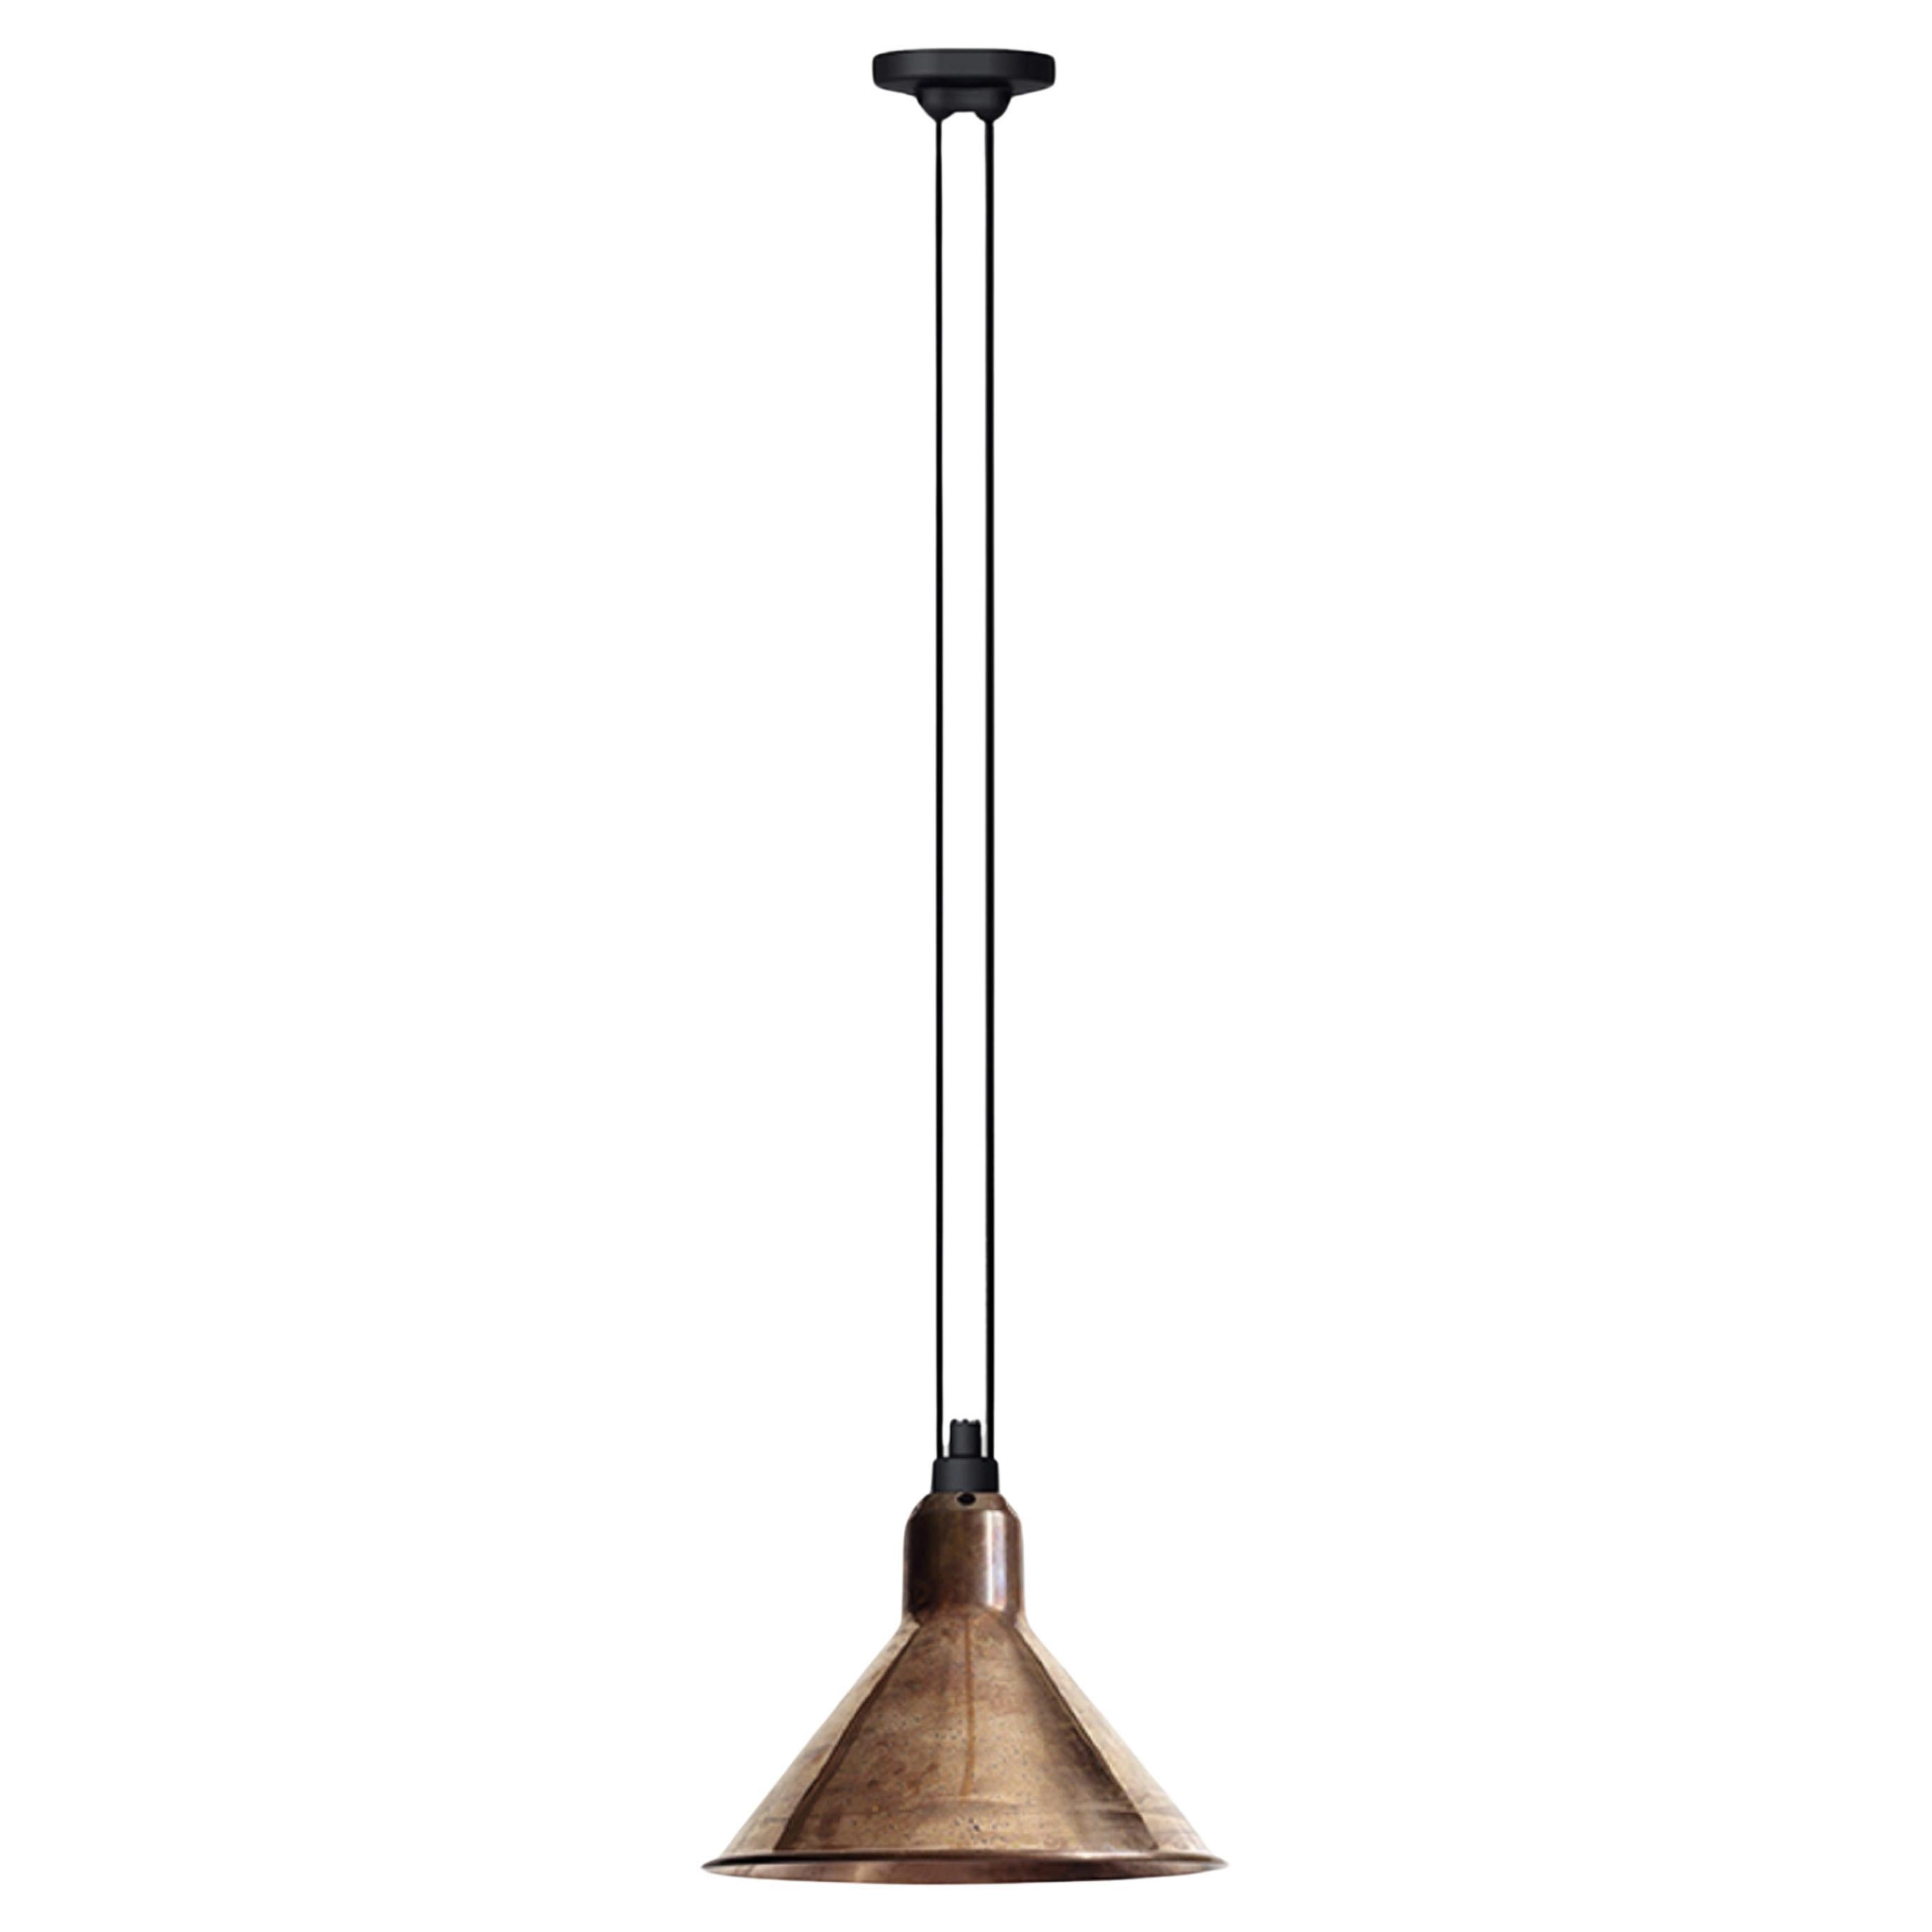 DCW Editions Les Acrobates N°322 Large Conic Pendant Lamp in Raw Copper Shade For Sale